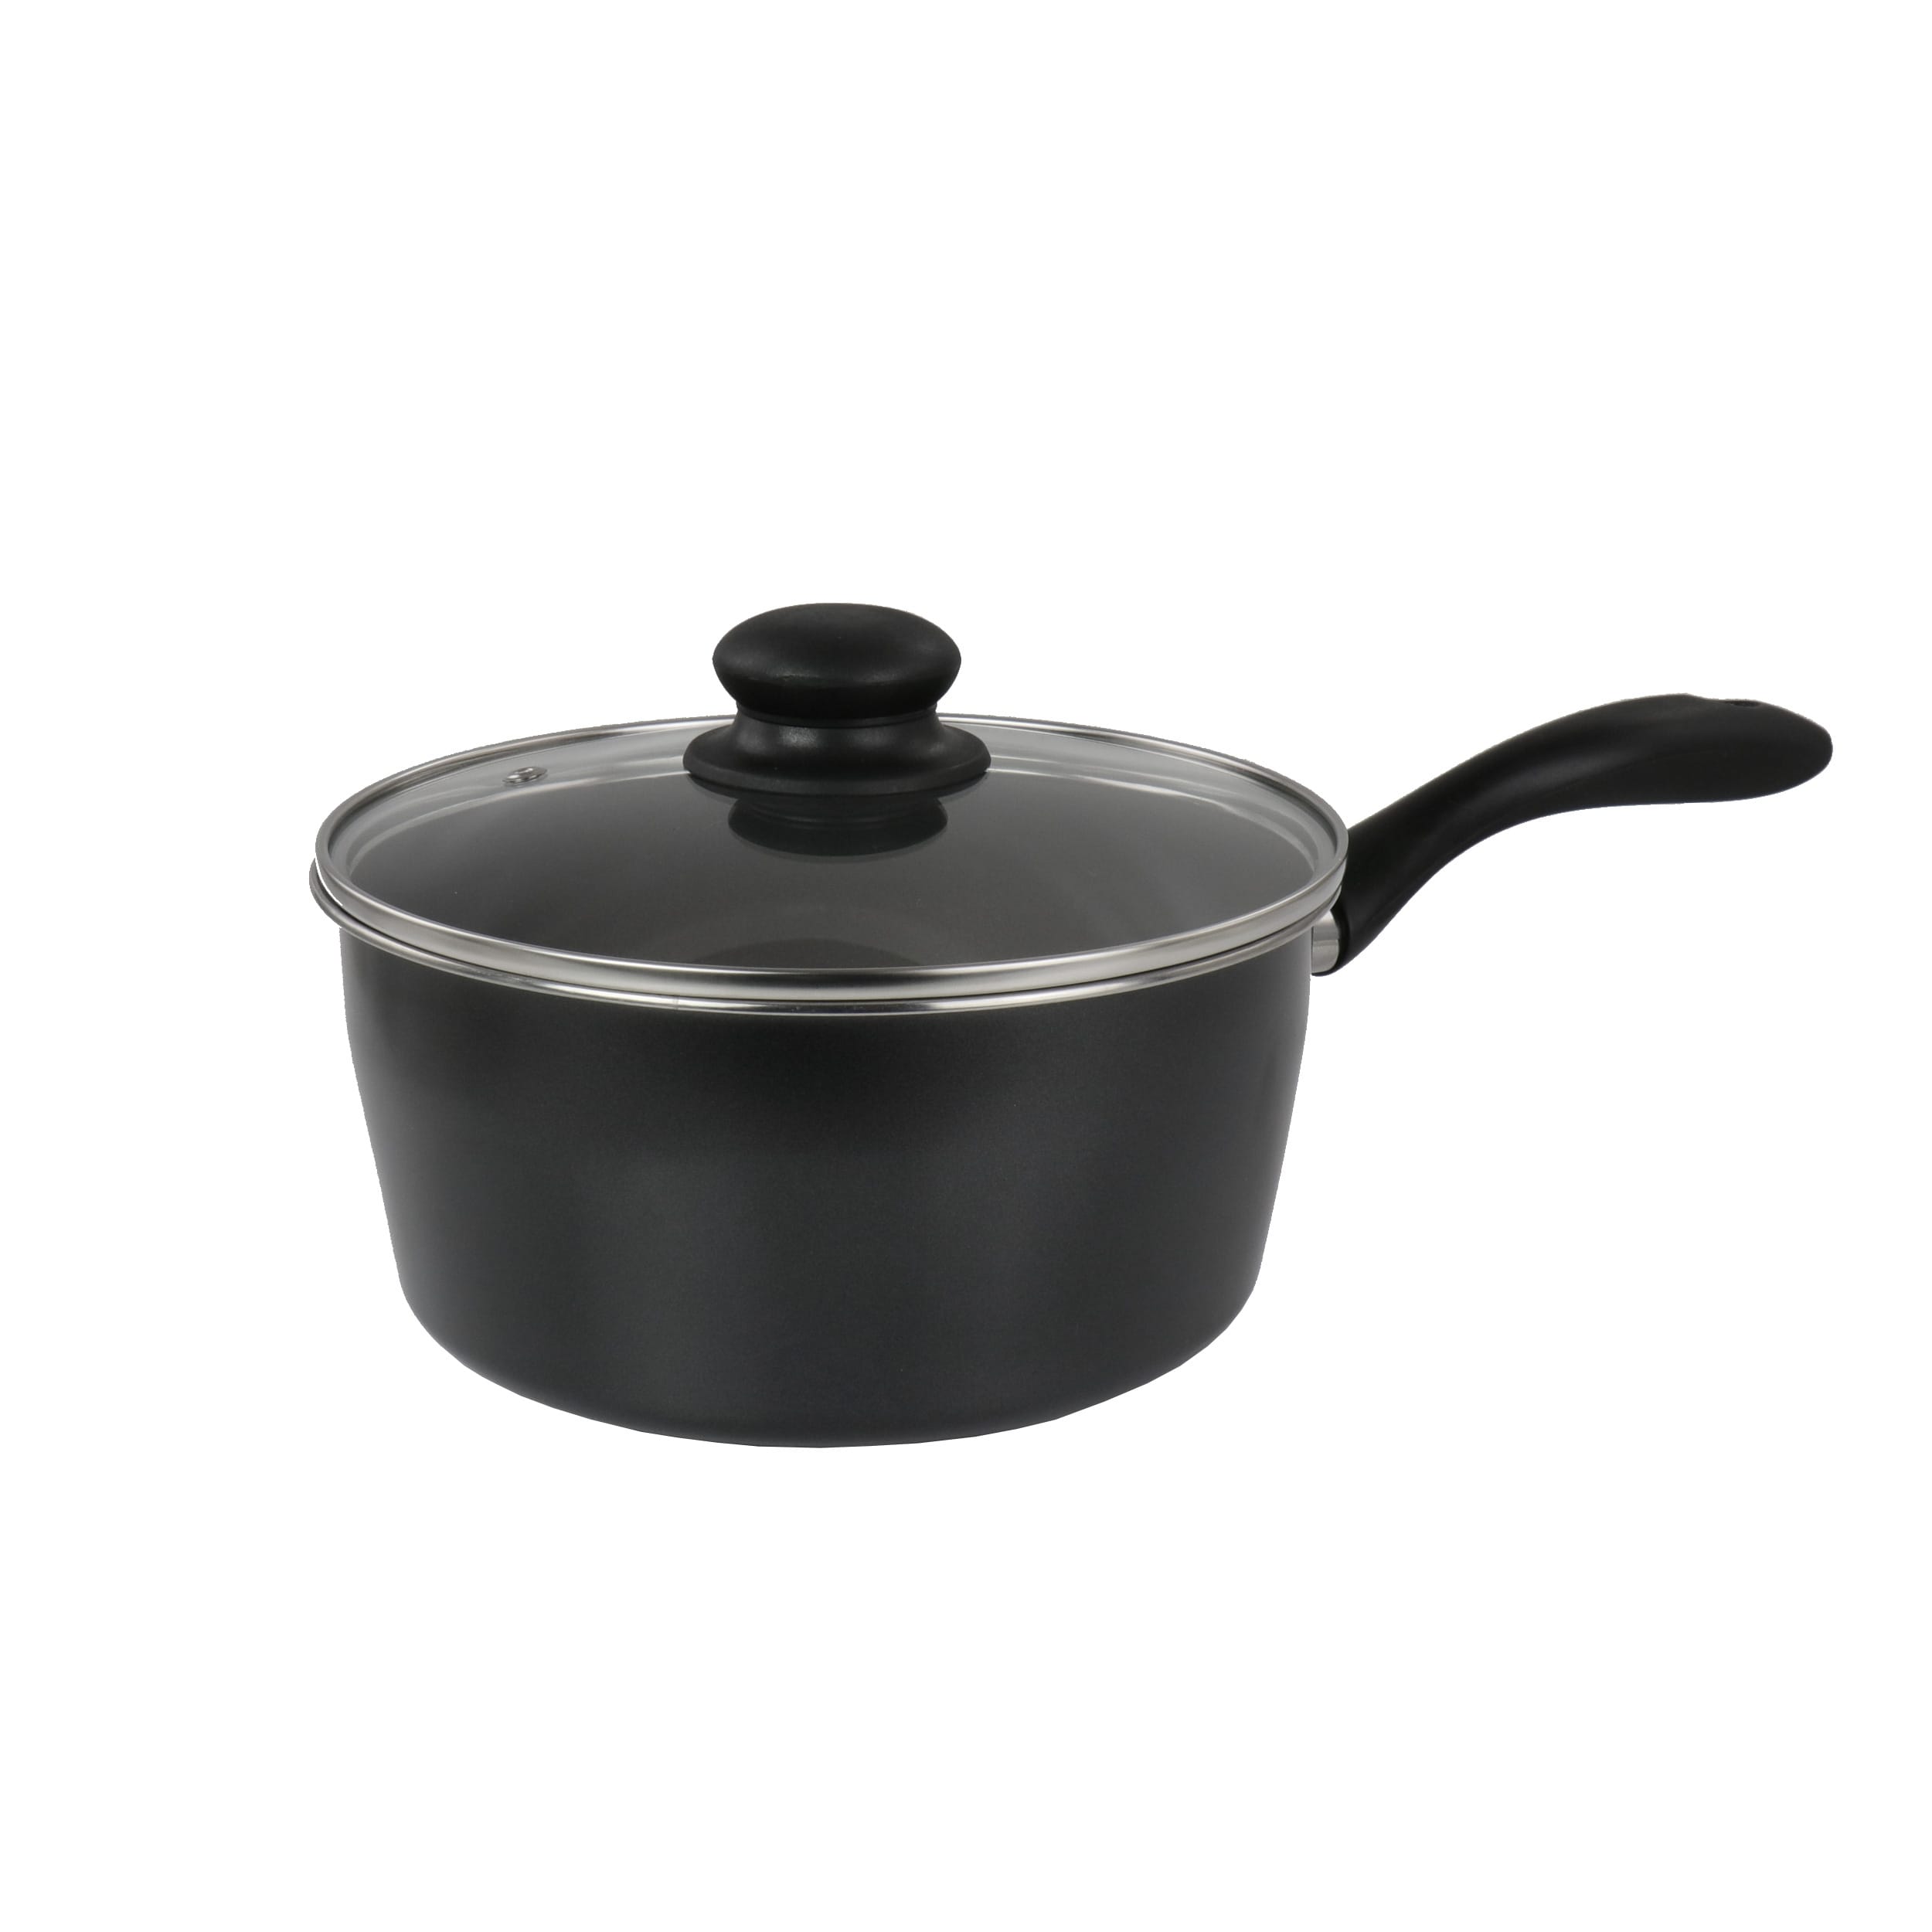 https://ak1.ostkcdn.com/images/products/is/images/direct/6415f569796f7ad5733795bd333d164500e3f9ec/Gibson-Home-Armada-7-Piece-Carbon-Steel-Cookware-Set.jpg